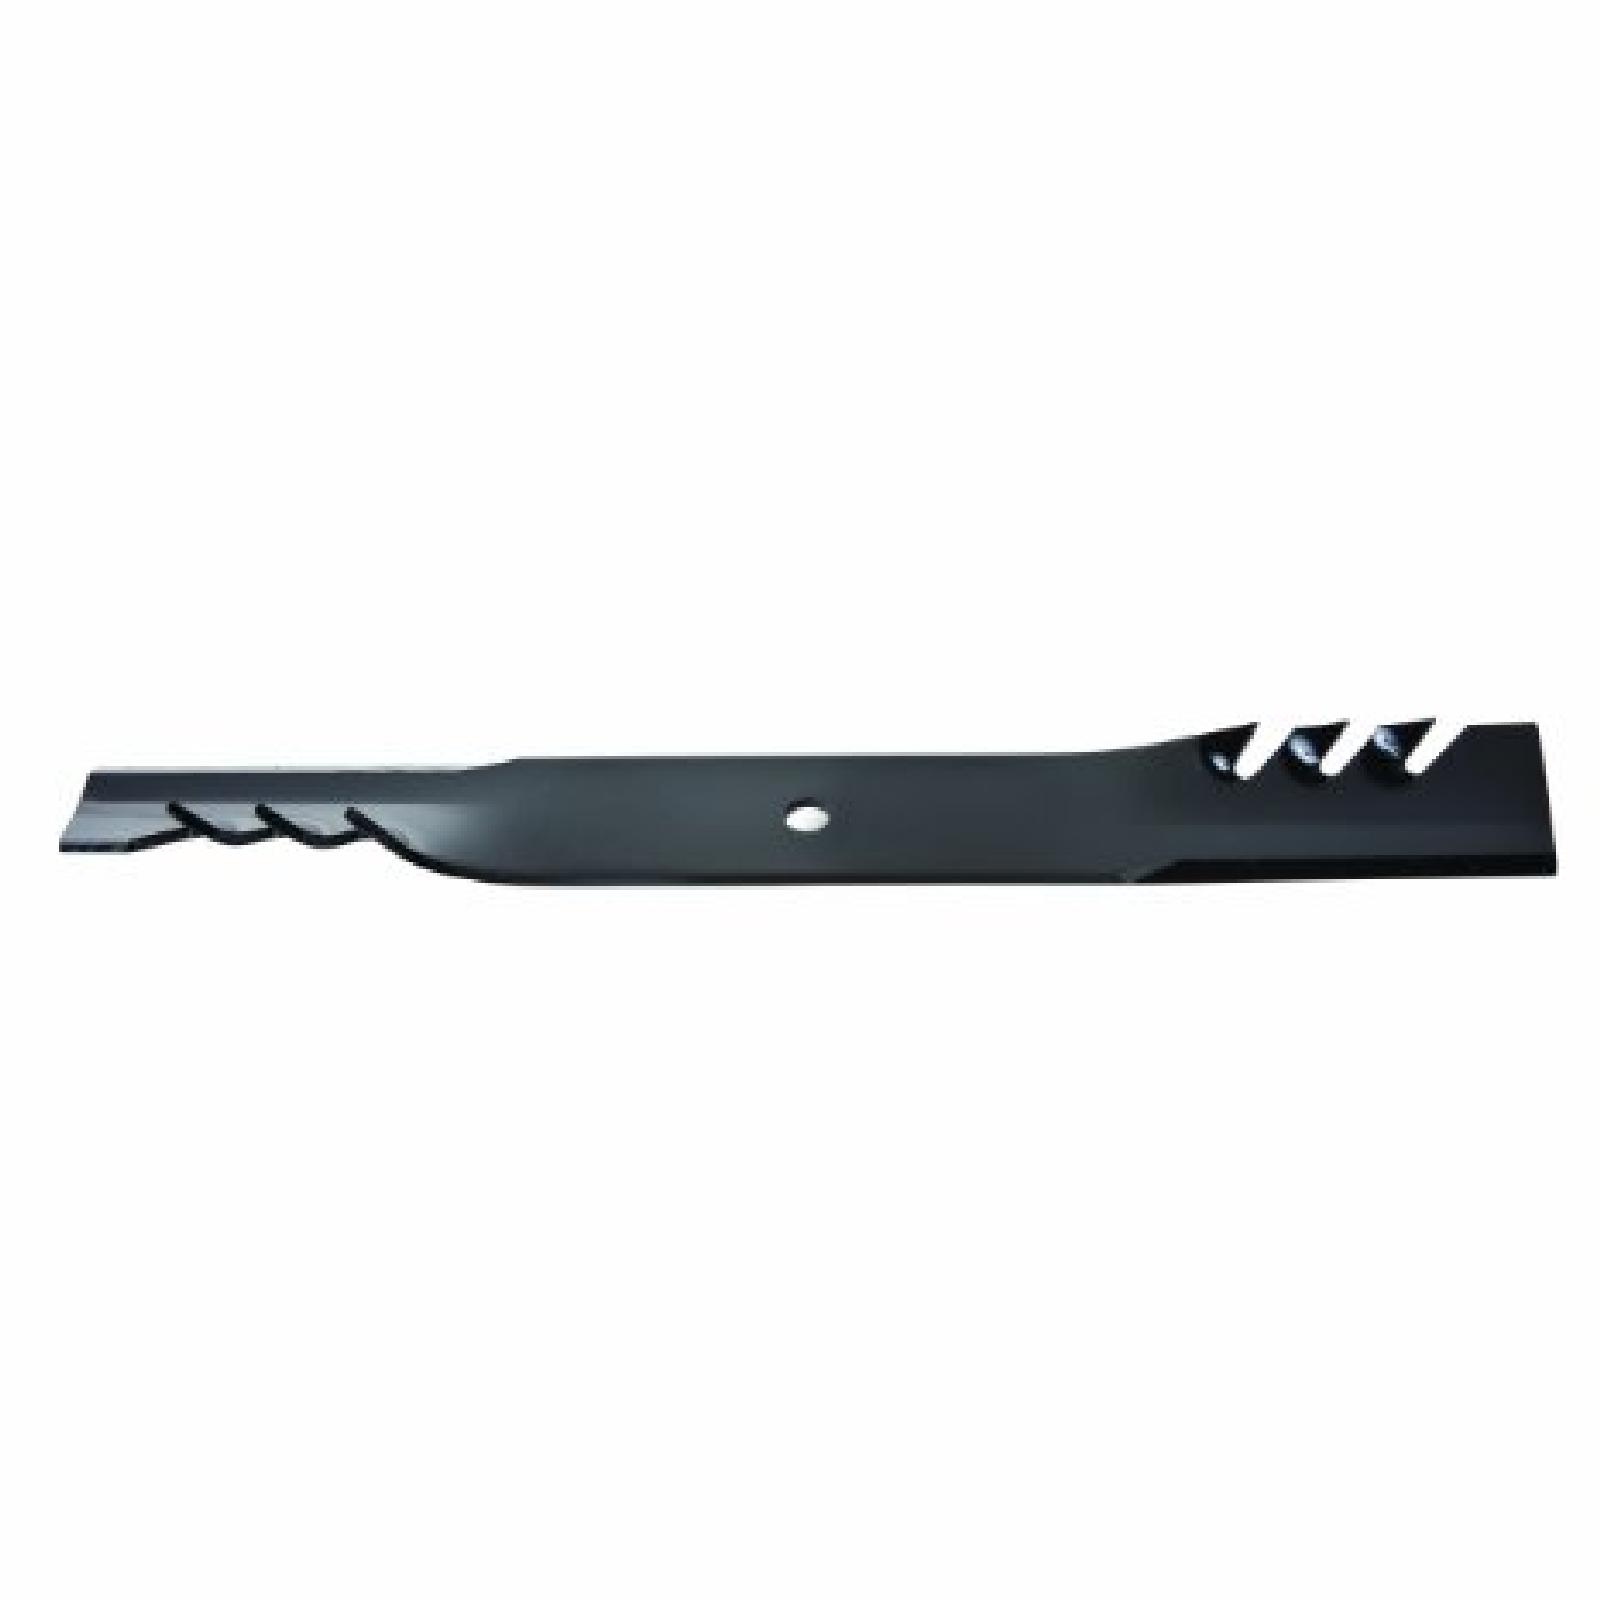 BLADE, SCAG, GATOR G3, 21 part# 96-347 by Oregon - Click Image to Close